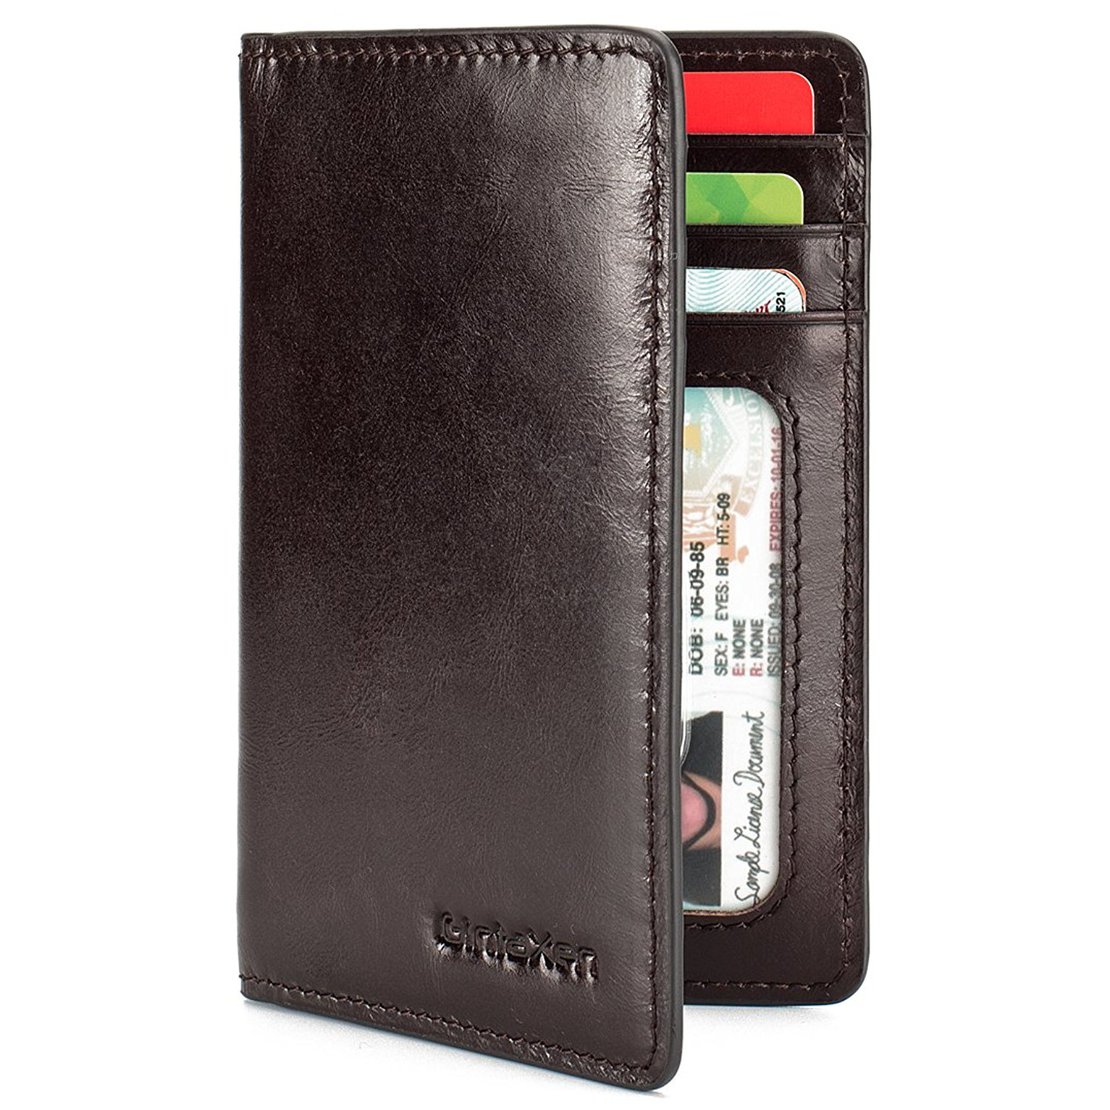 a-review-of-the-gintaxen-bifold-card-holder-leatherwallets